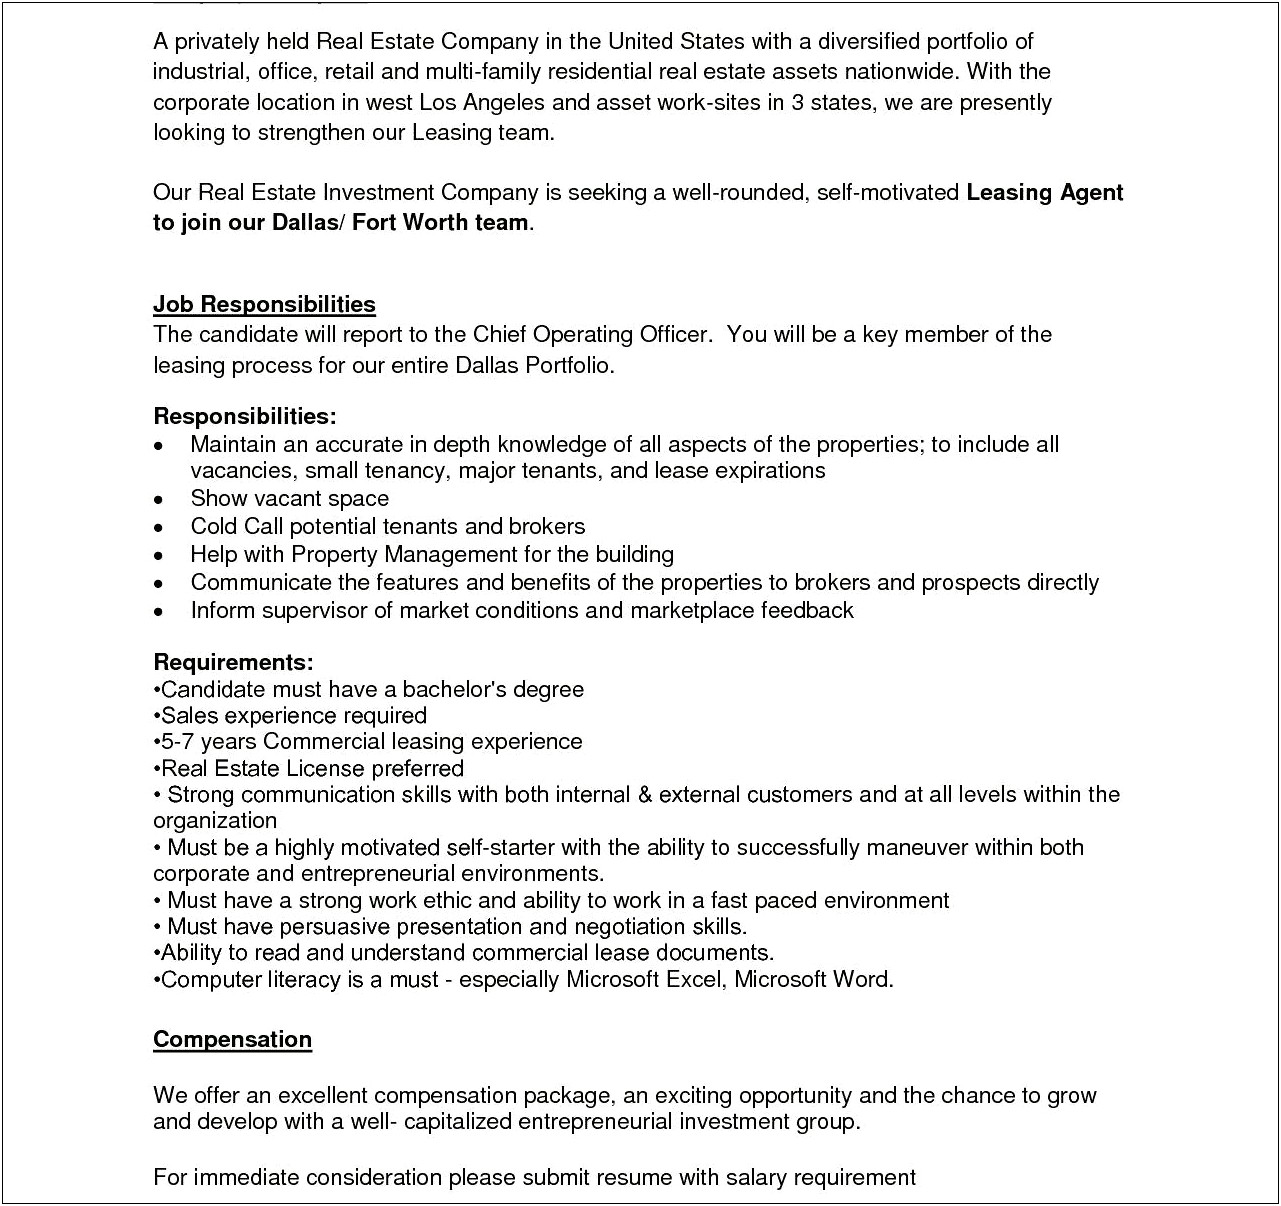 Resume For Leasing Consultant Objective